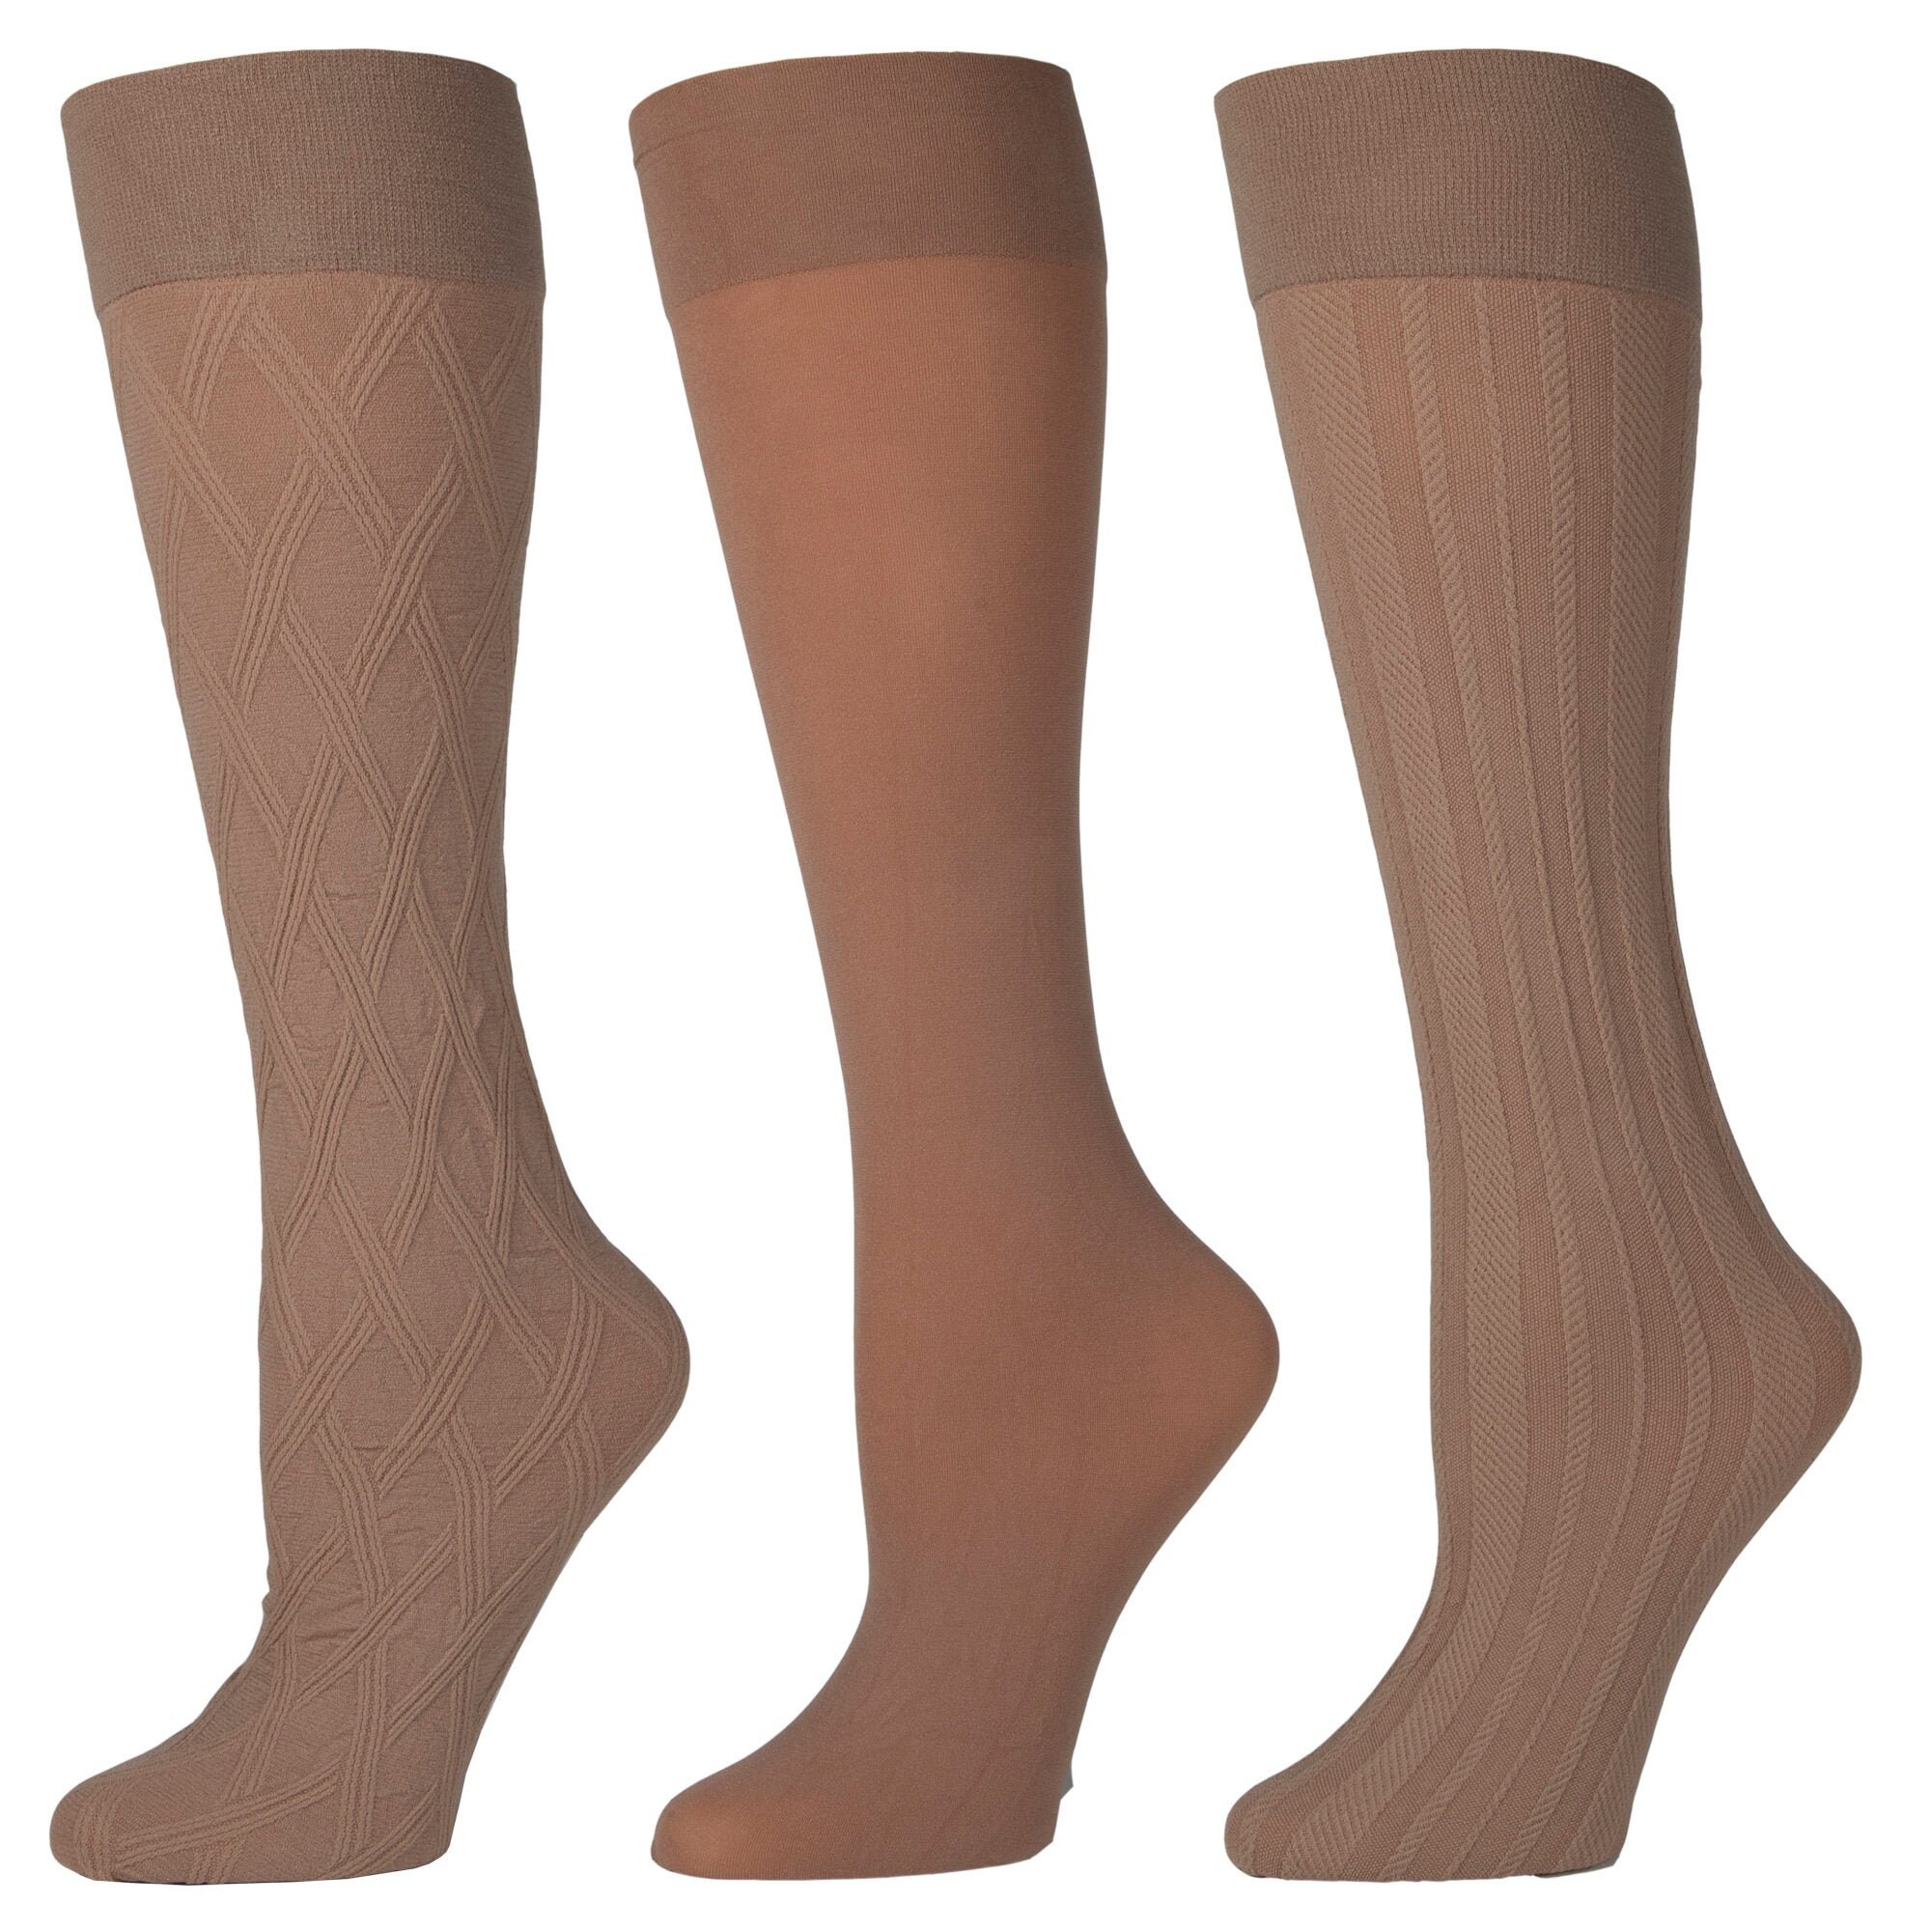 Support Plus Womens Opaque Closed Toe Wide Calf Trouser Socks  3 Pack   Support Plus